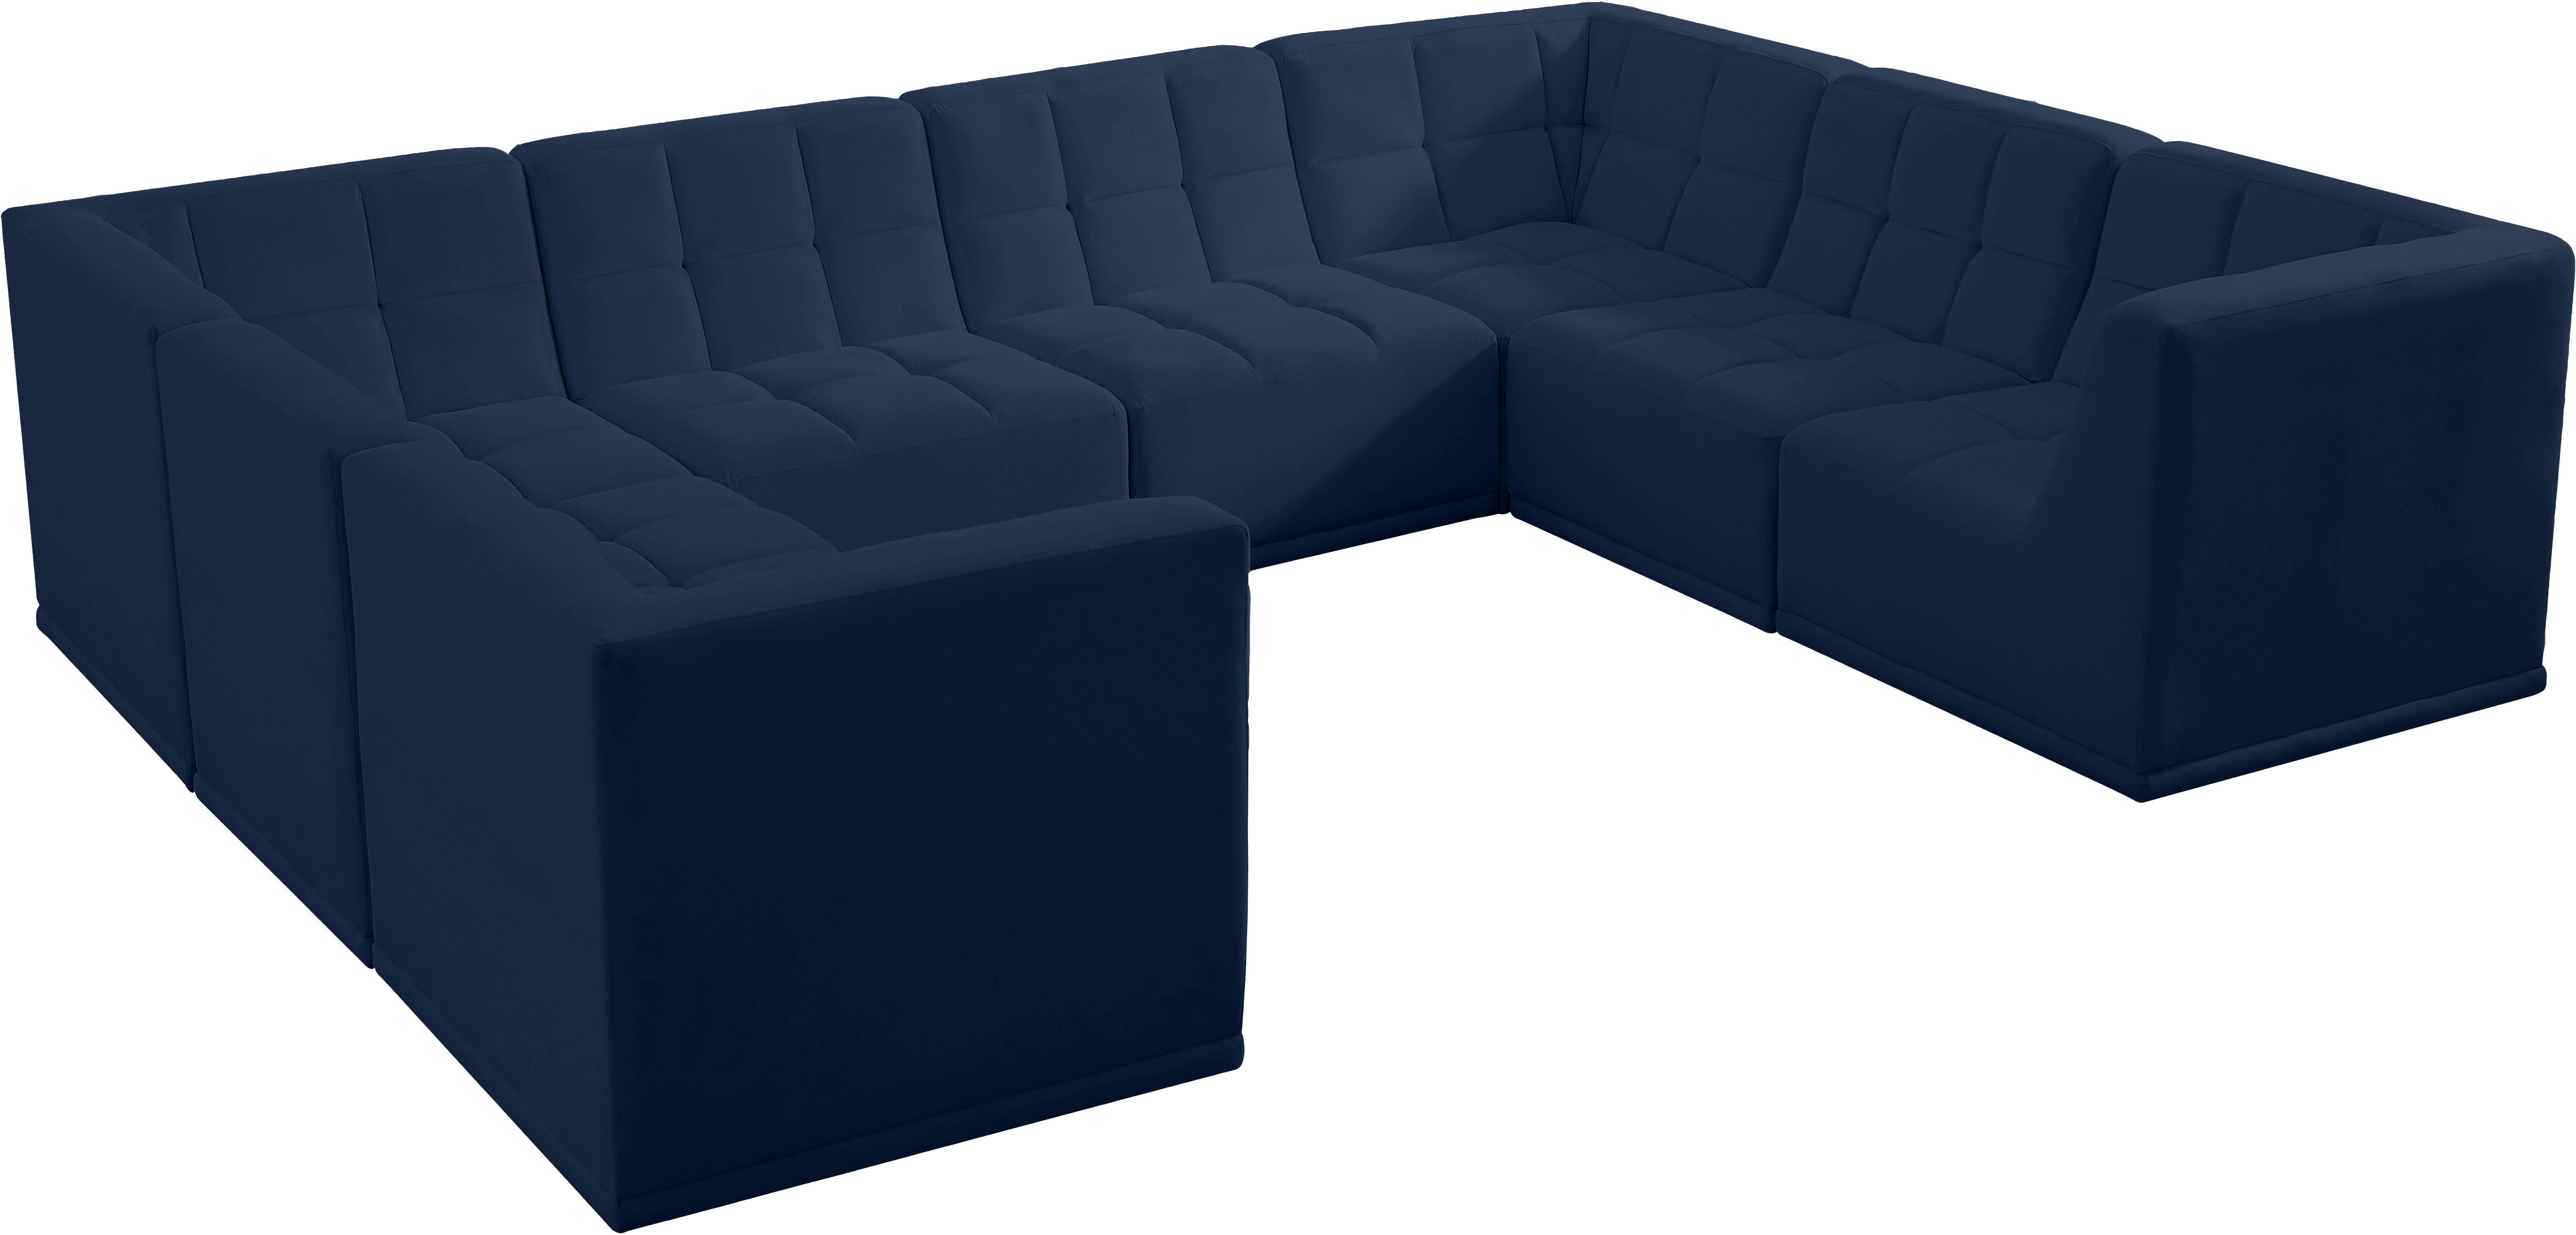 Meridian Furniture - Relax - Modular Sectional - Navy - 5th Avenue Furniture